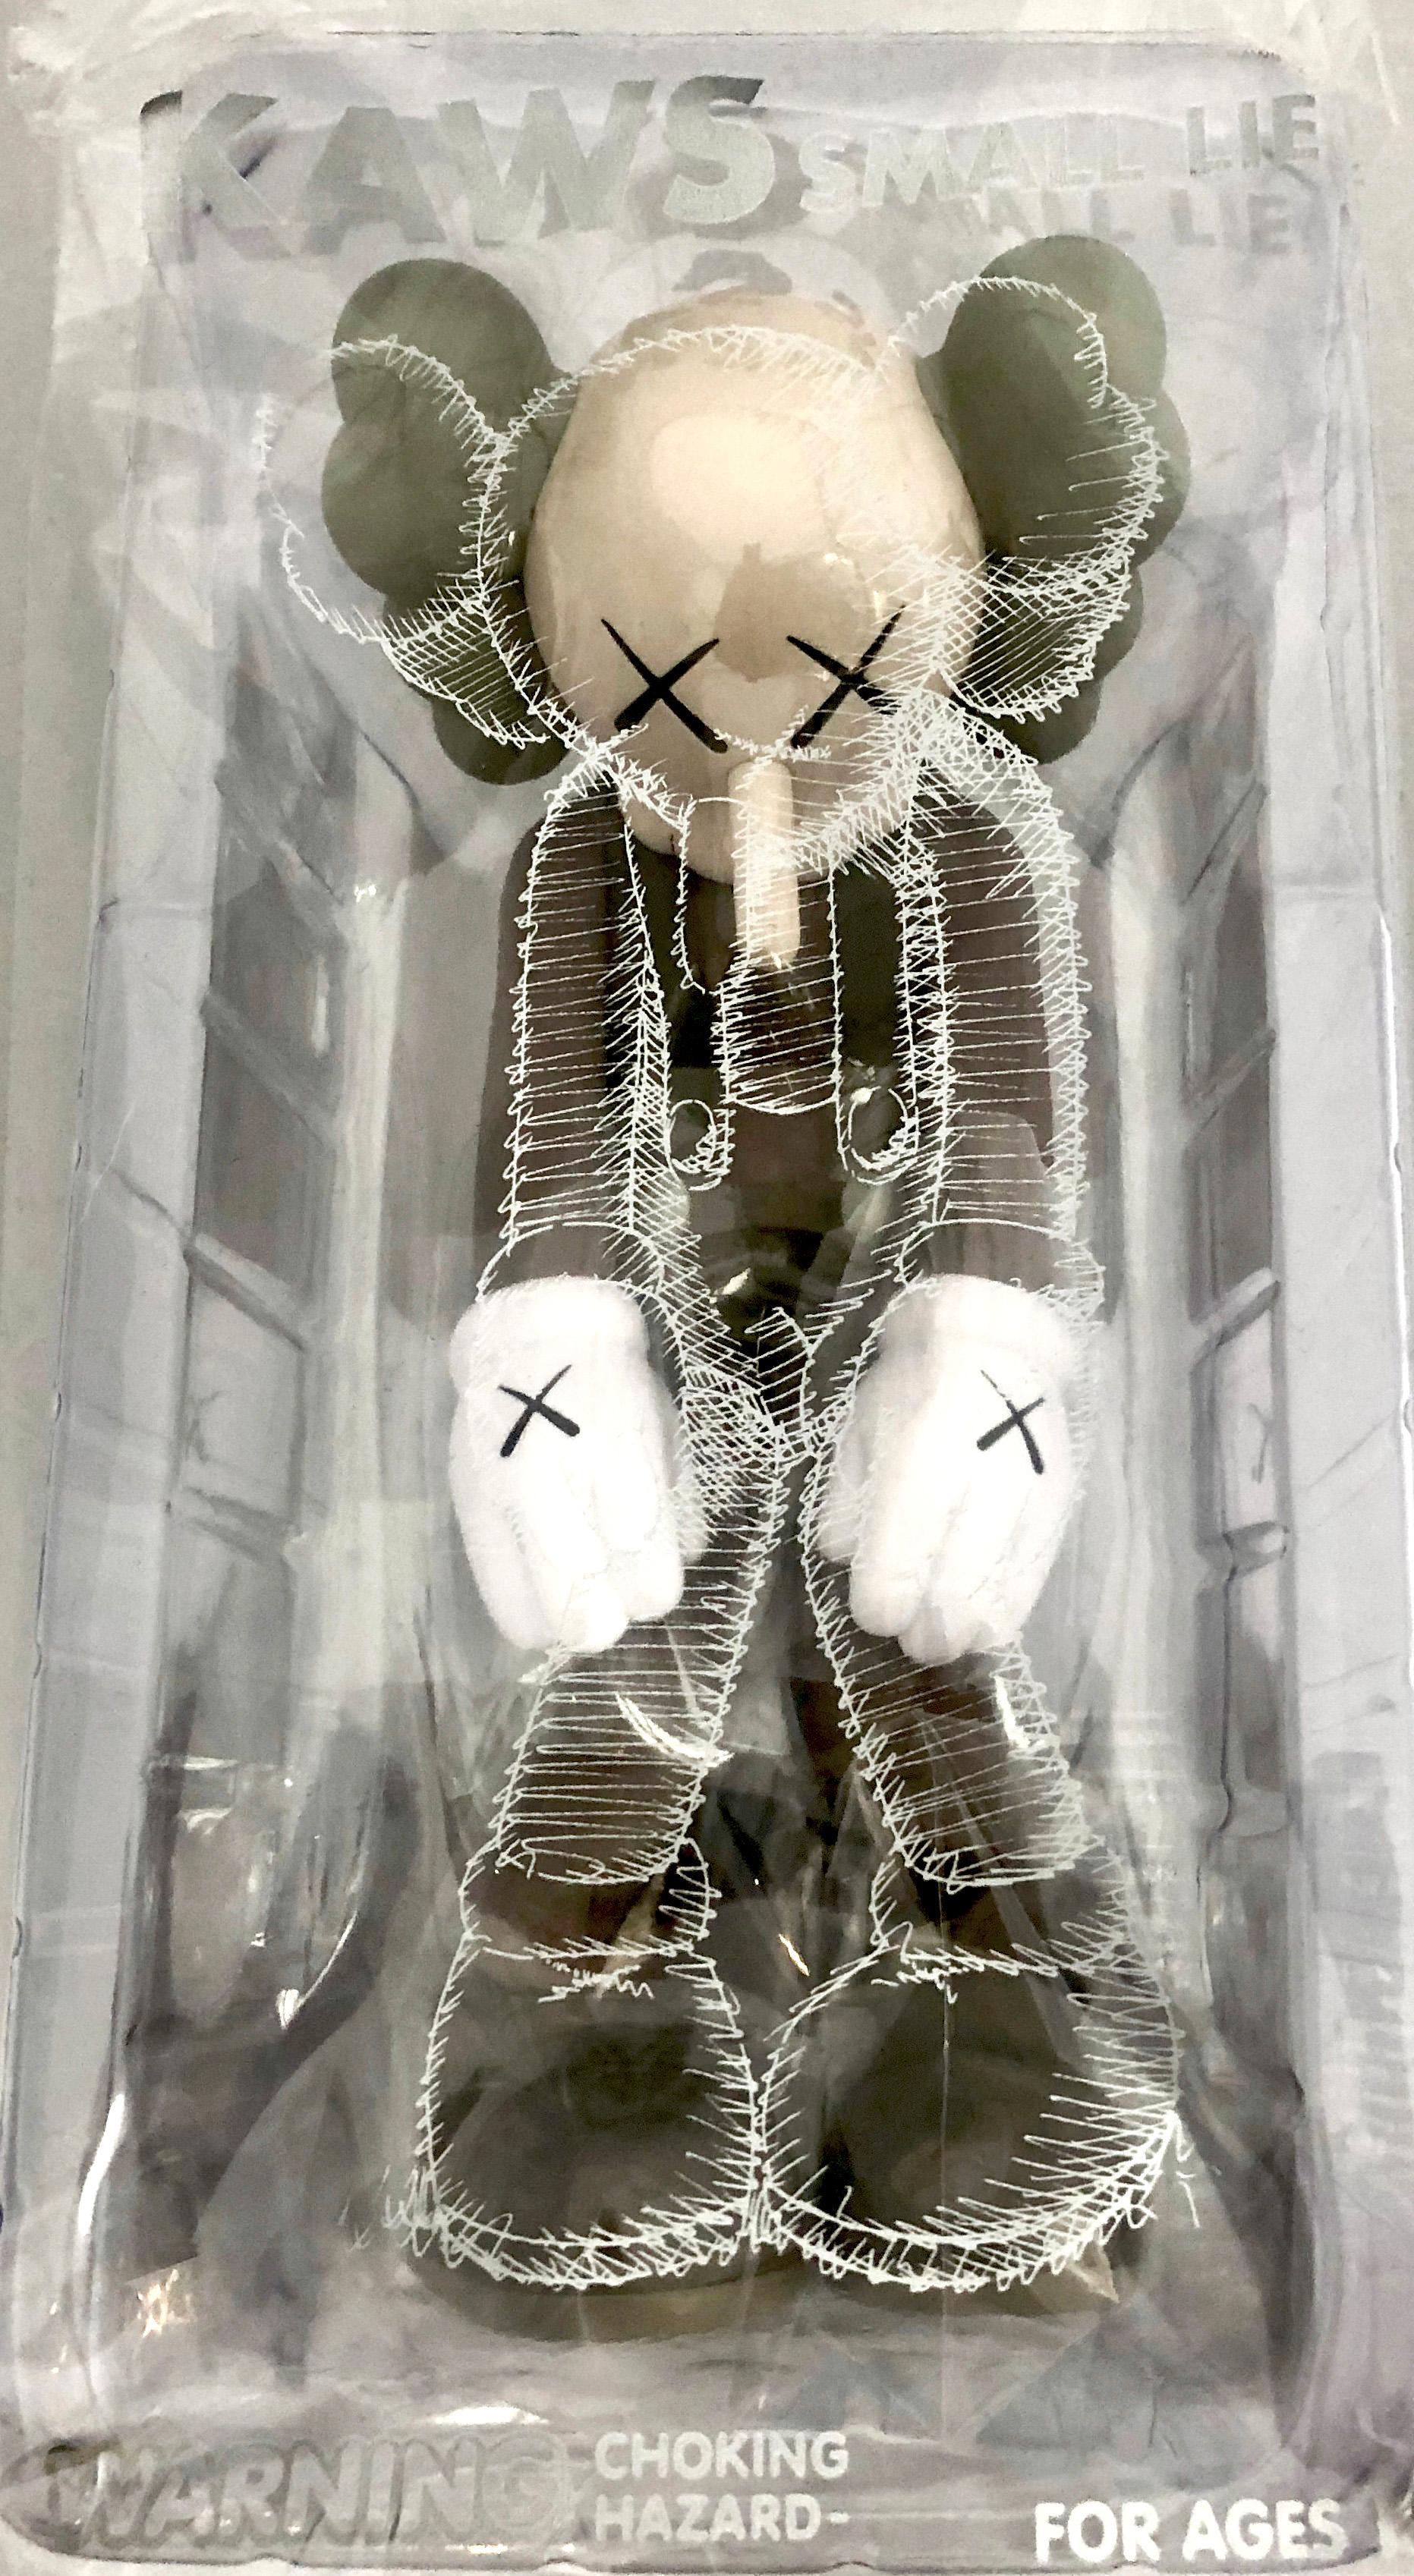 KAWS SMALL LIE Brown: 
Among KAWS’s signature “Companions,” Small Lie has the most childlike resonance. Clothed in overall shorts, the Pinocchio-inspired figure bows its head in shame as if hiding from a parent after creating trouble. KAWS debuted